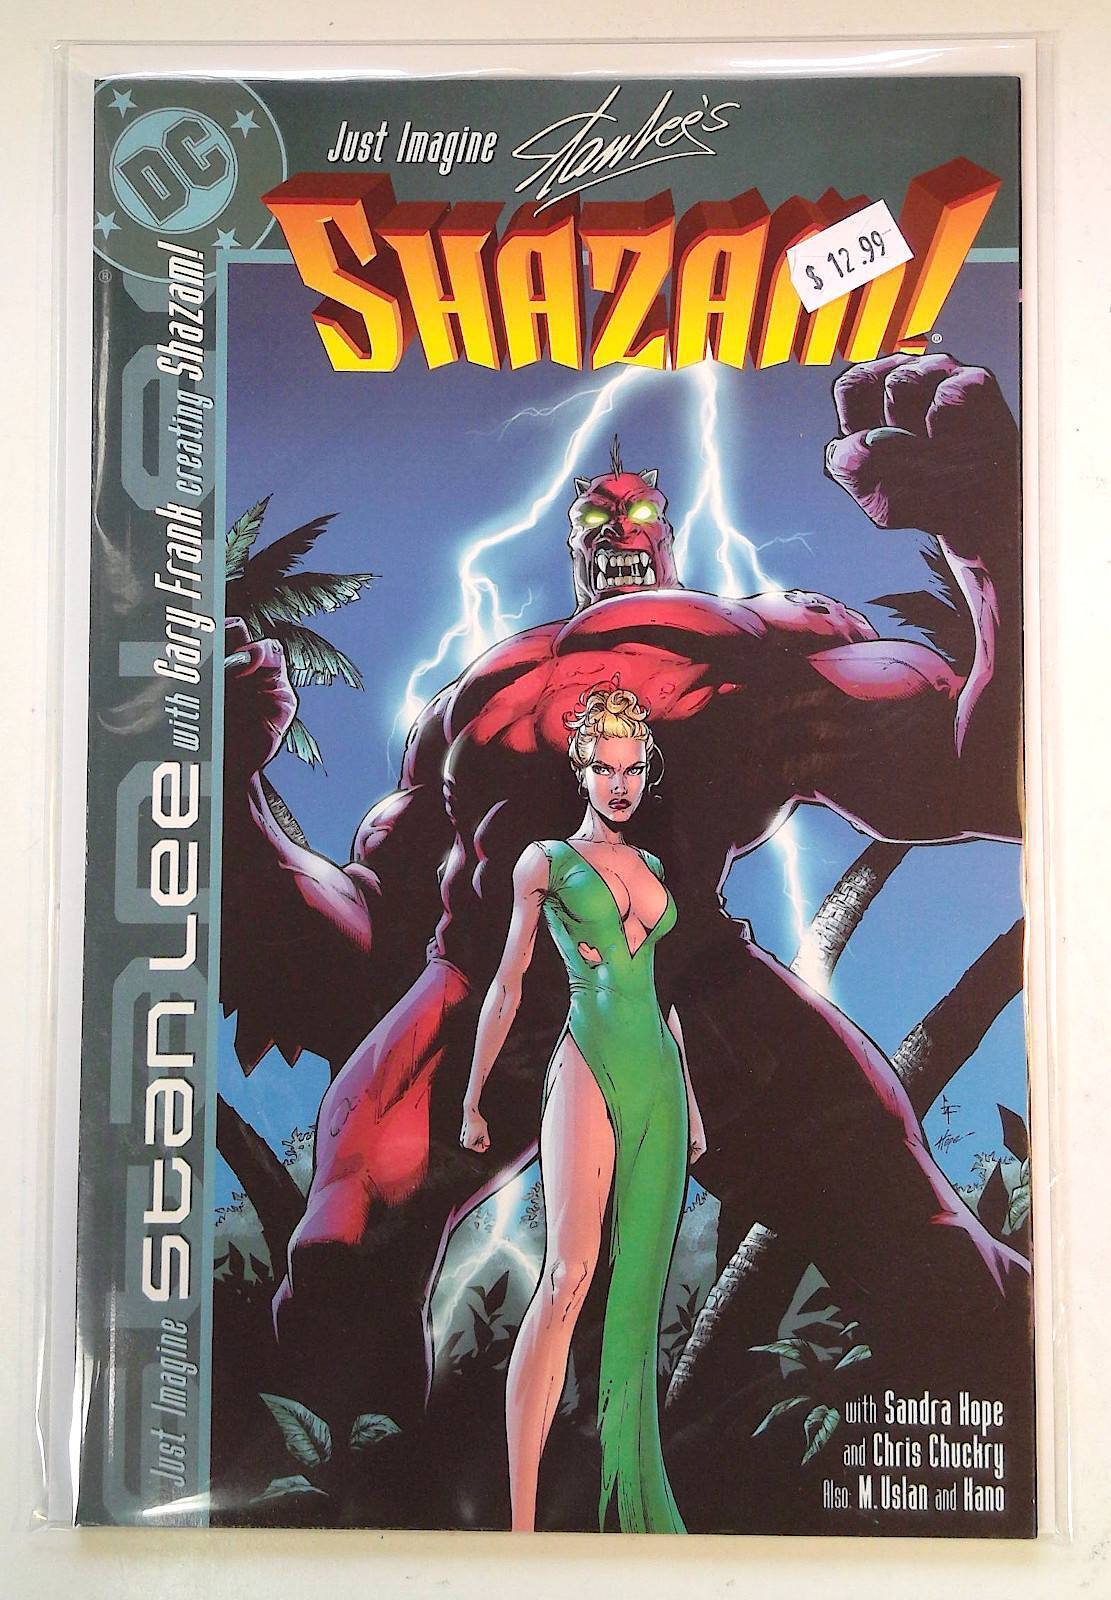 2002 Just Imagine Stan Lee With Gary Frank Creating Shazam #1 DC Comic Book